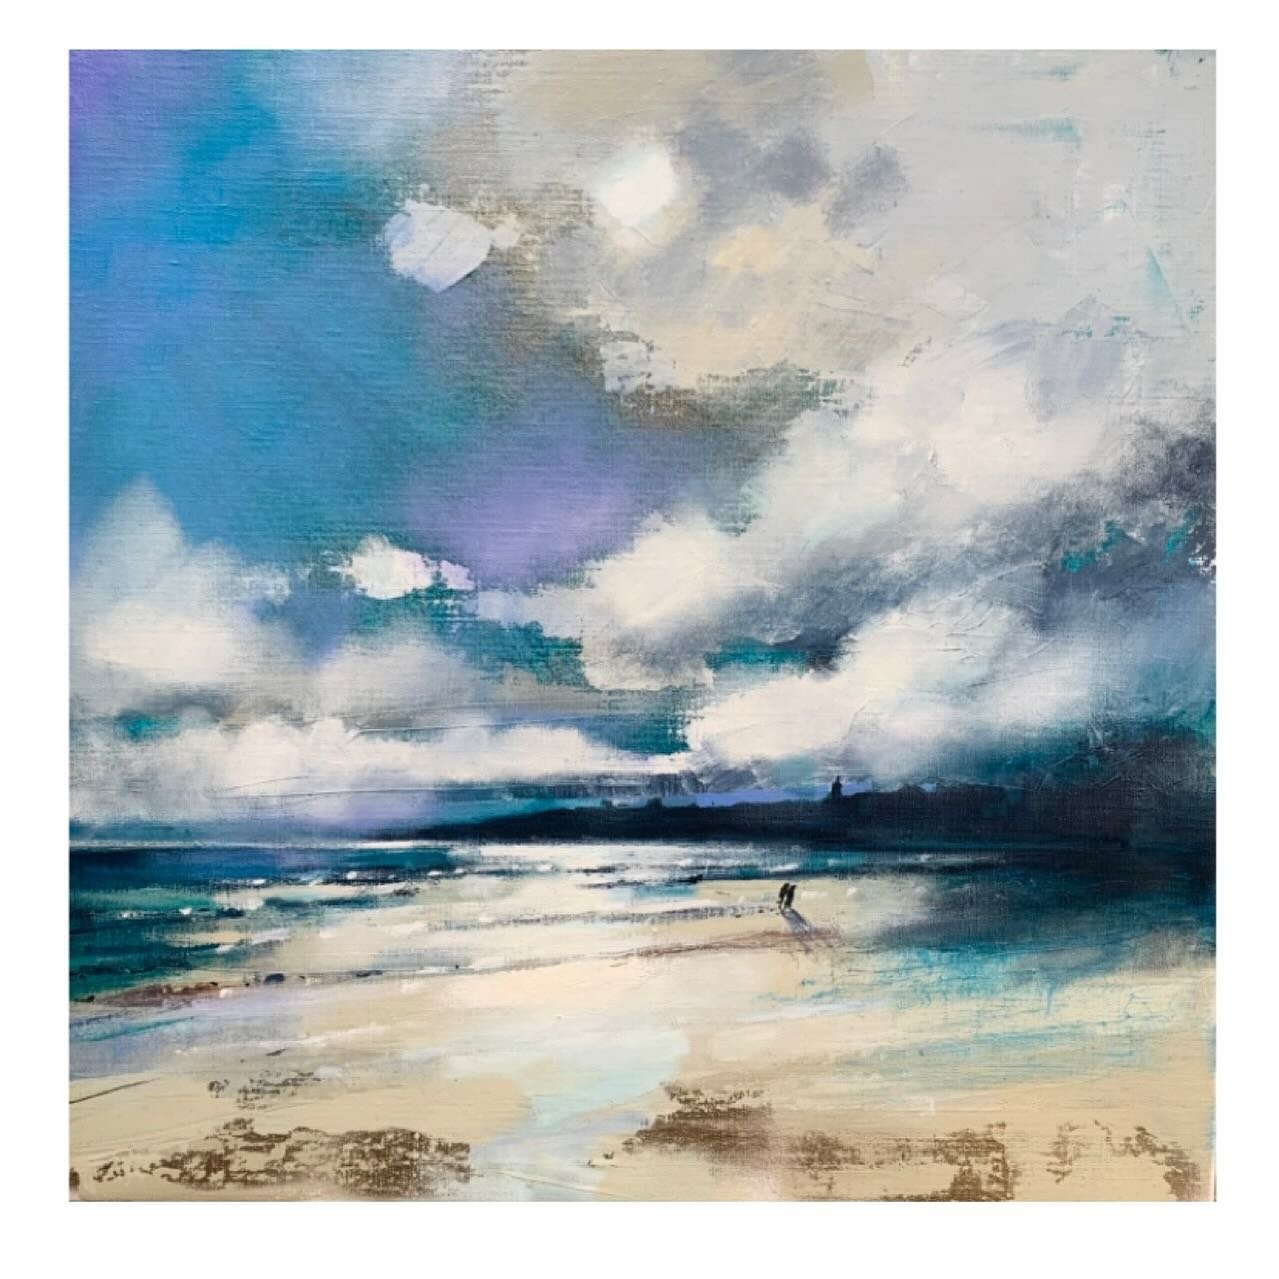 &lsquo;Tide&rsquo;s Out, West Sands&rsquo; (St Andrews) 
20&rdquo; x 20&rdquo; 
Decided to upscale the little painting I did of a beautiful blowy morning on West Sands Beach. 
www.emmasdavisartist.co.uk 
.
.
.
#emmasdavisart #emmasdavisartist #scotti